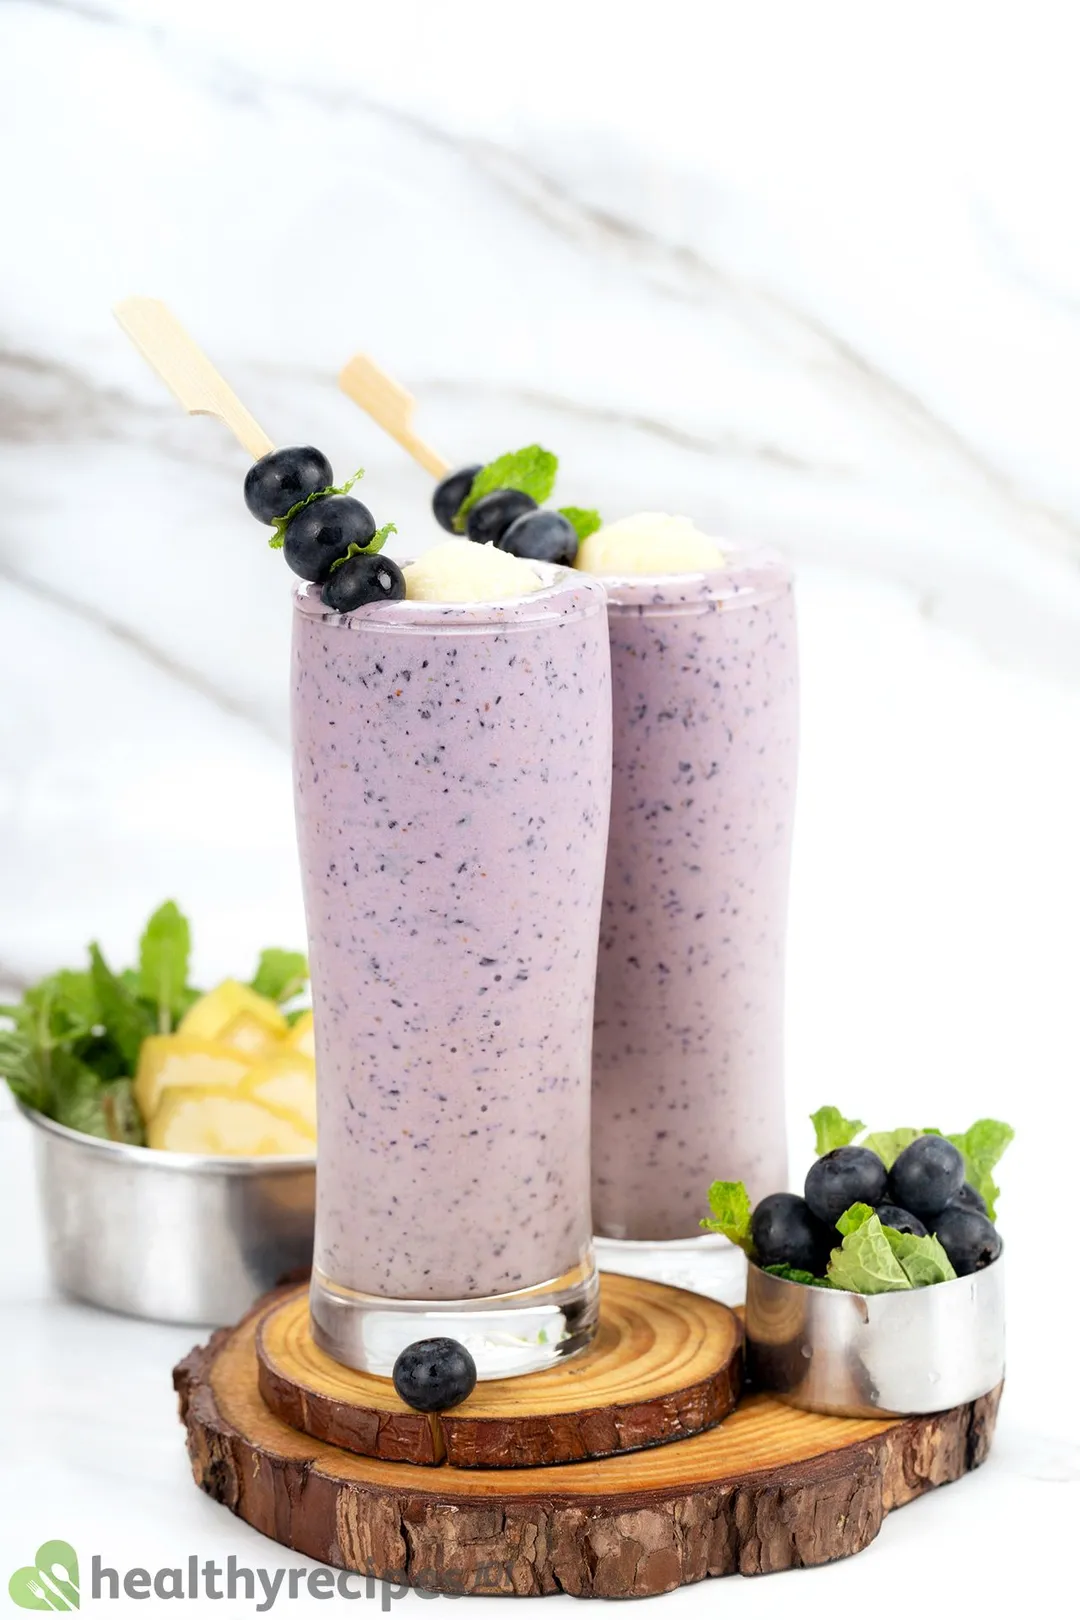 Two tall blueberry banana smoothie glasses placed on wooden boards with blueberries nearby and a small bowl filled with bananas and mint leaves in the background.